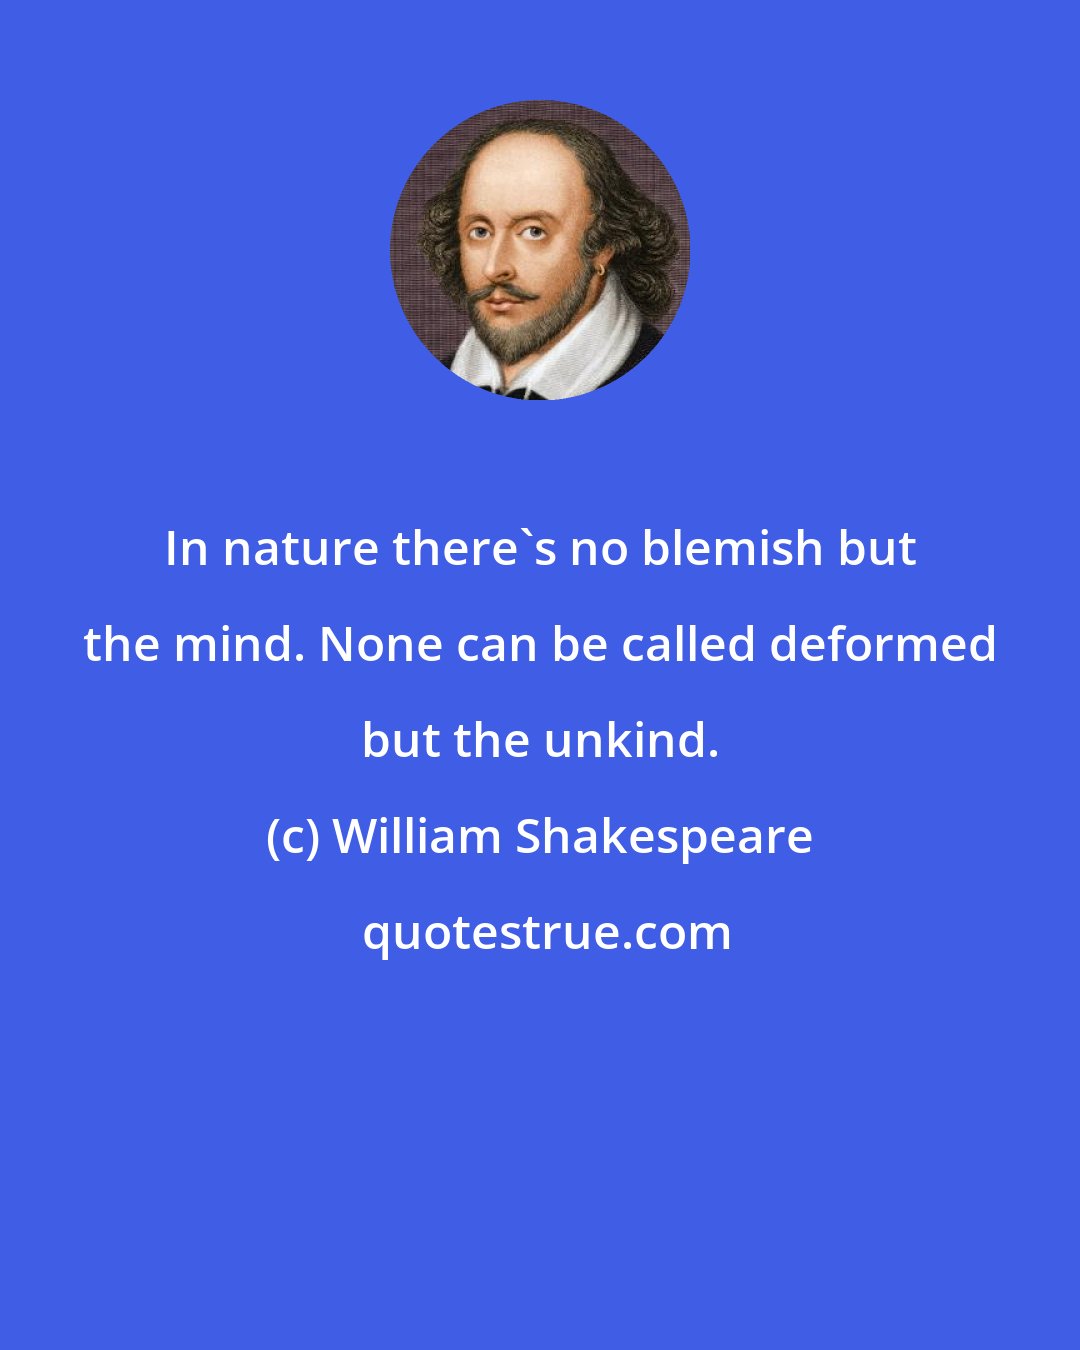 William Shakespeare: In nature there's no blemish but the mind. None can be called deformed but the unkind.